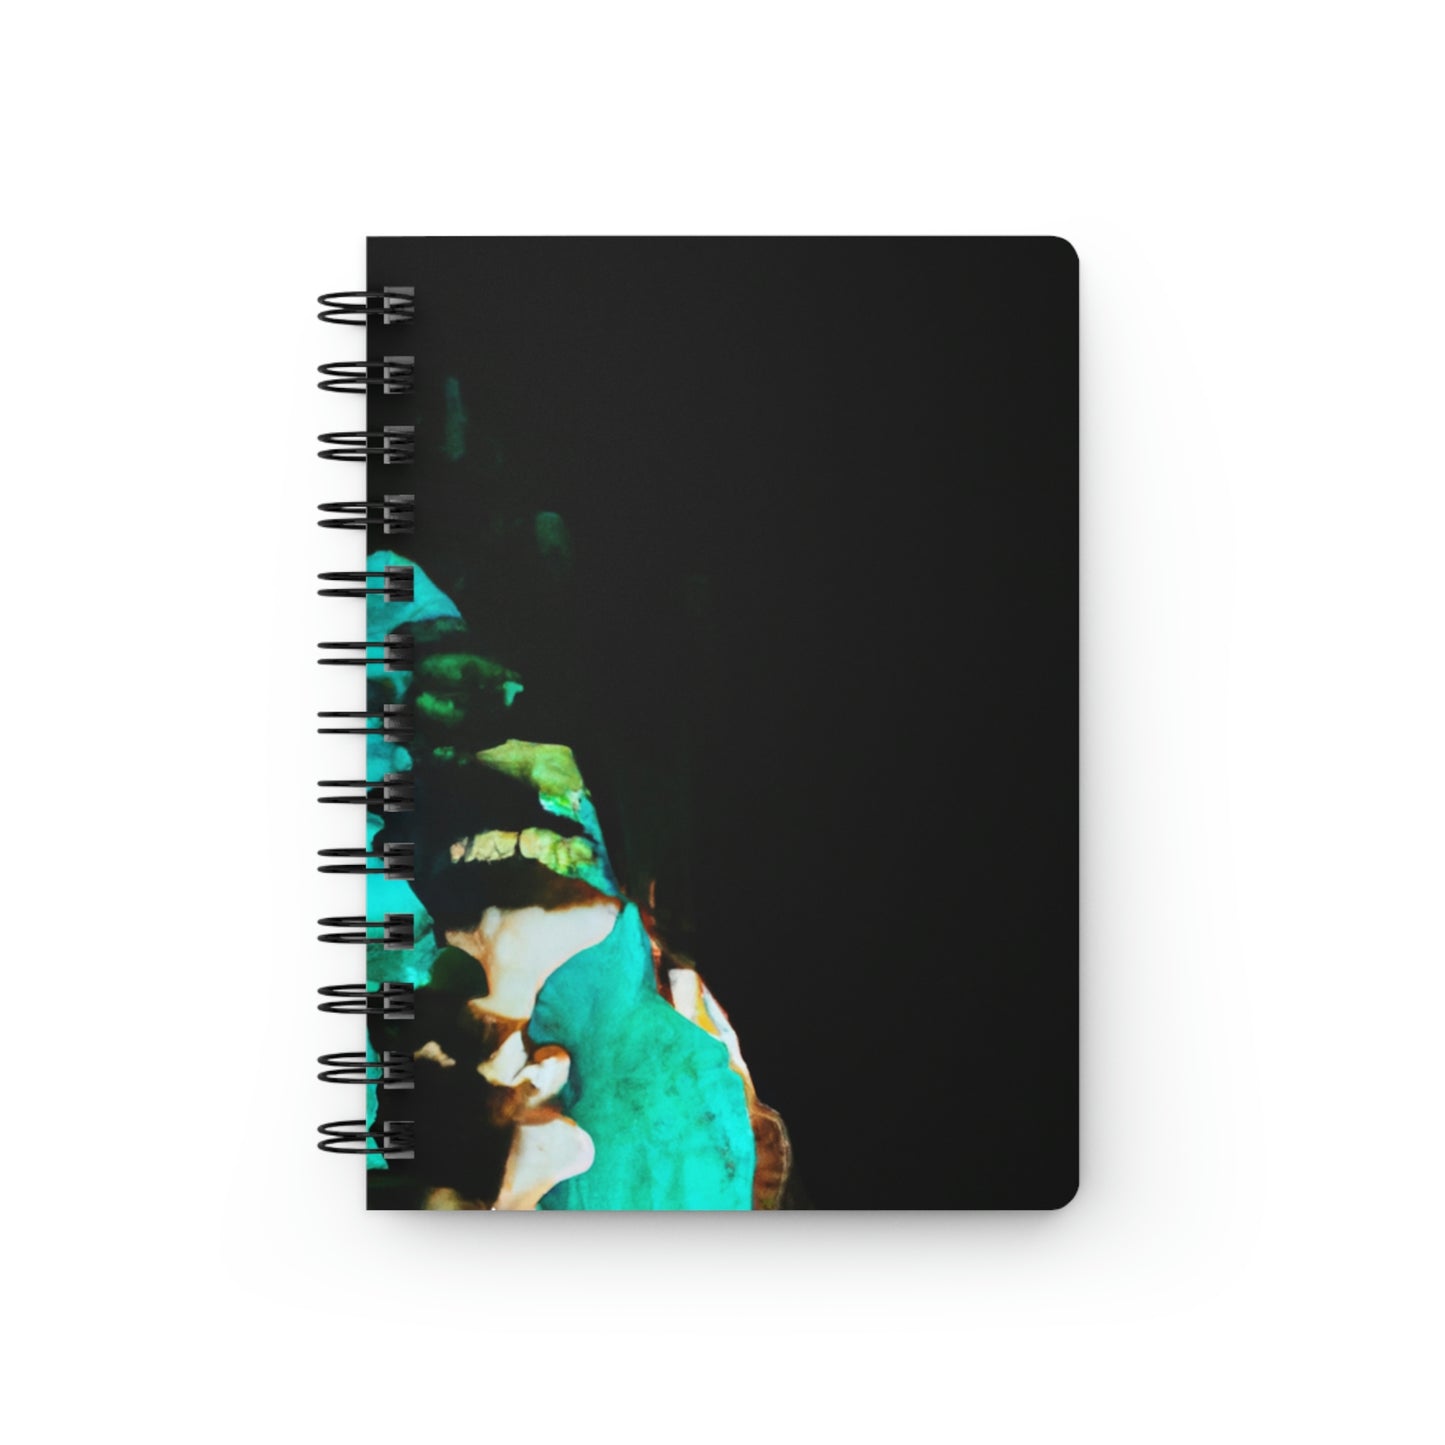 The Gleaming Relic of the Cave - The Alien Spiral Bound Journal